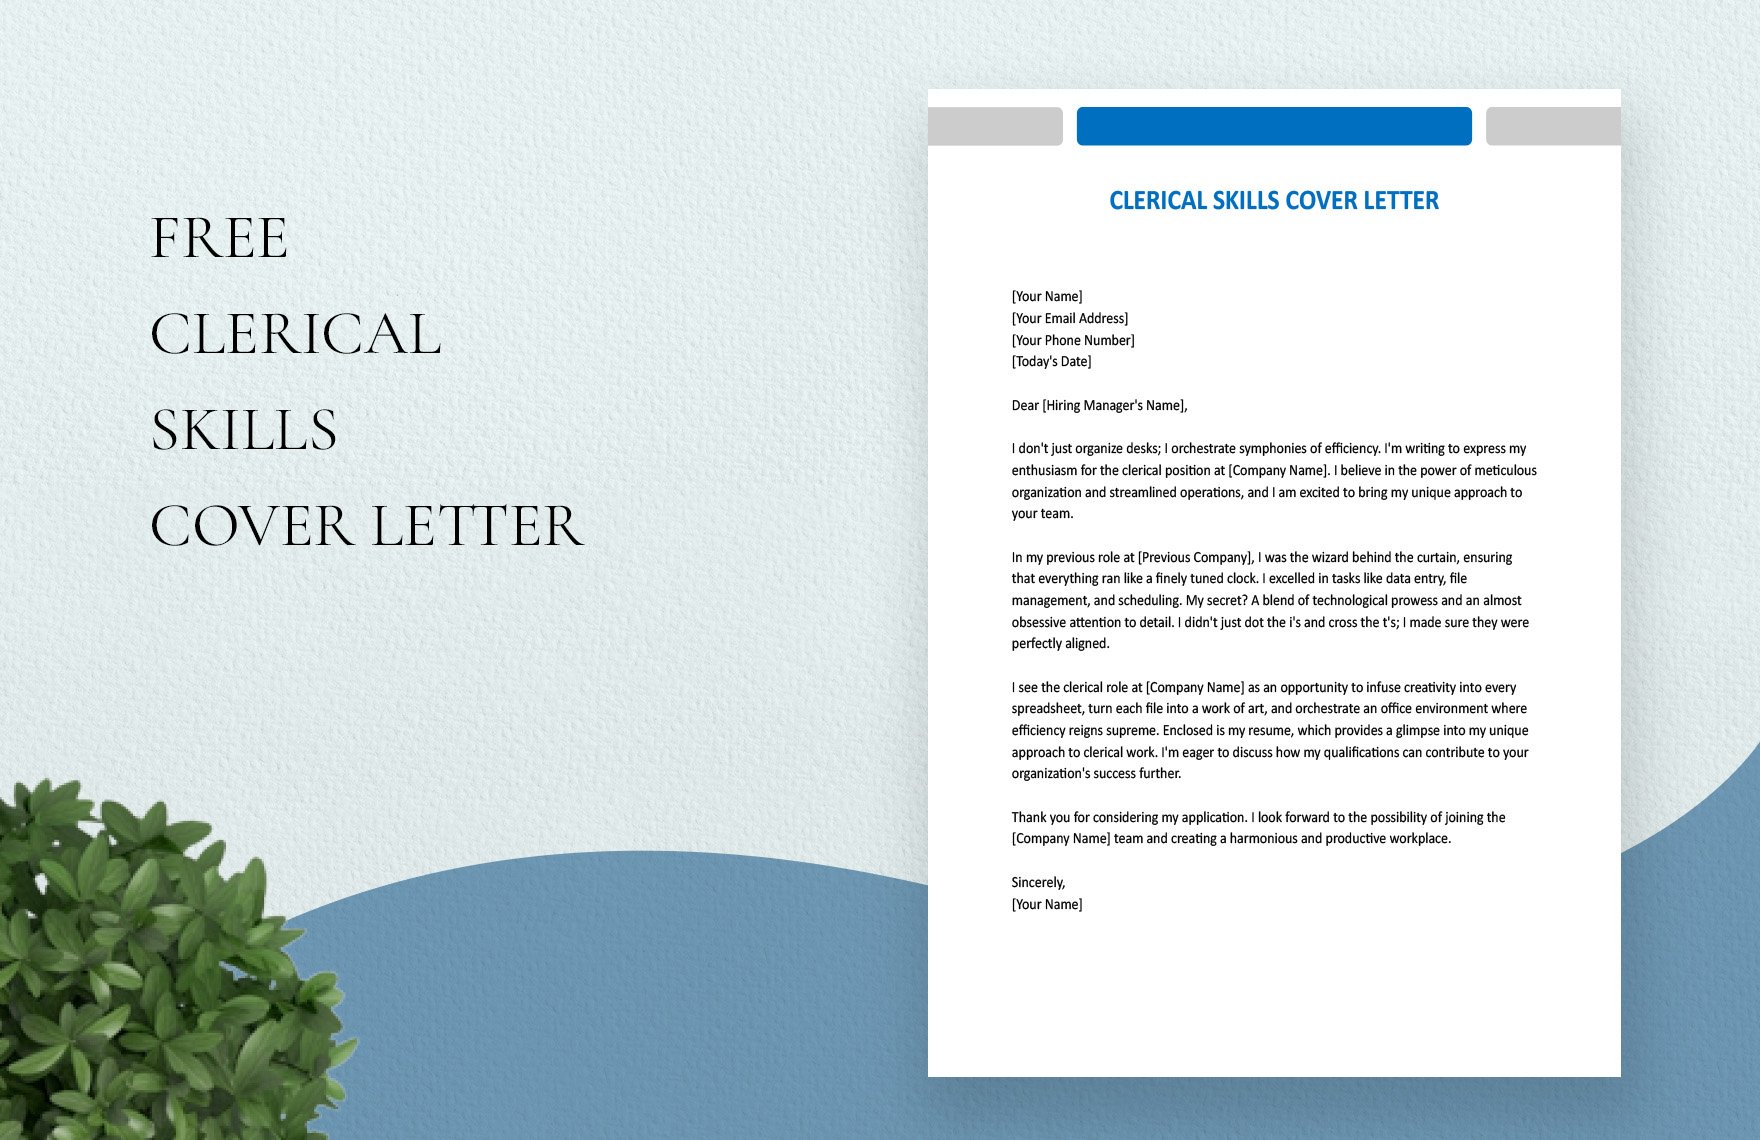 Clerical Skills Cover Letter